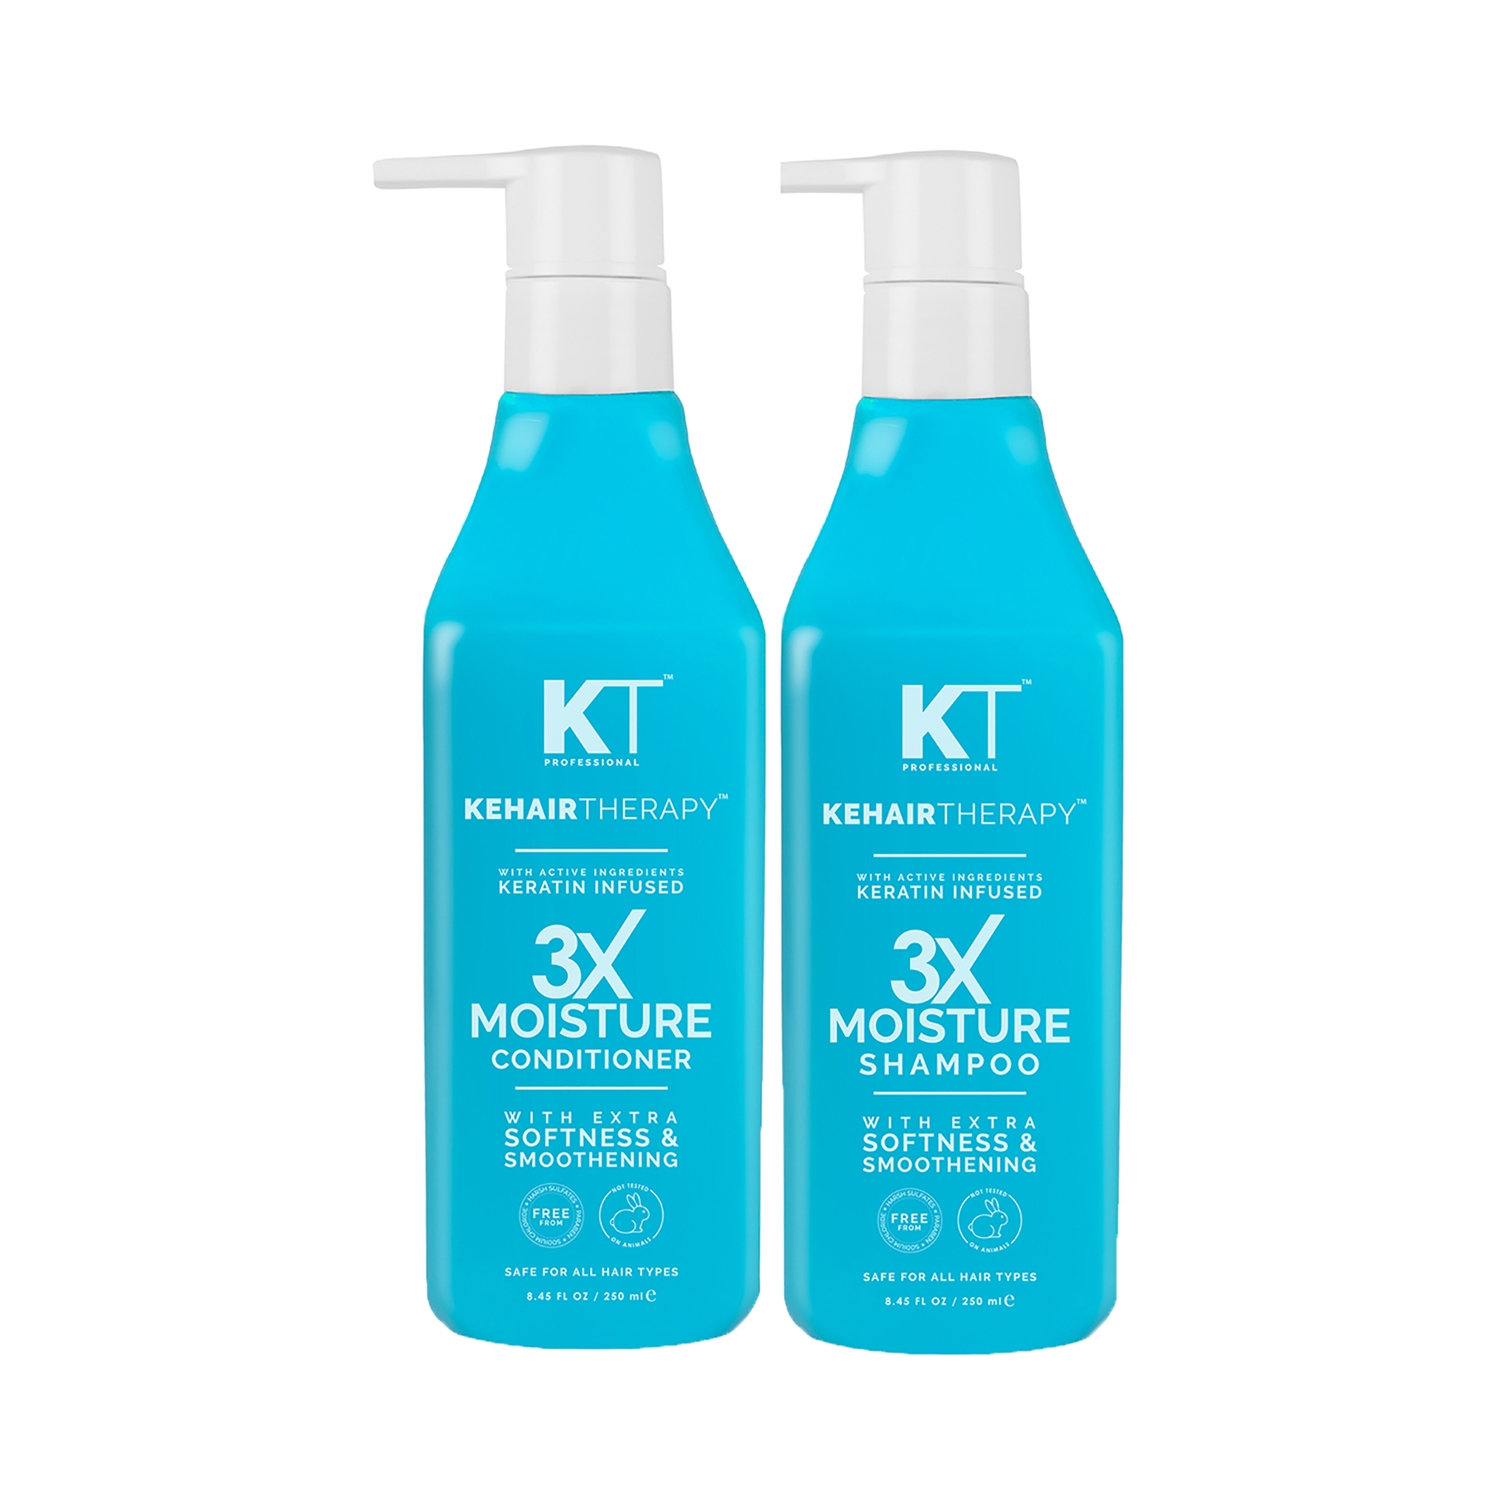 KT Professional | KT Professional Kehairtherapy 3X Moisture Shampoo & Conditioner Combo (2Pcs)